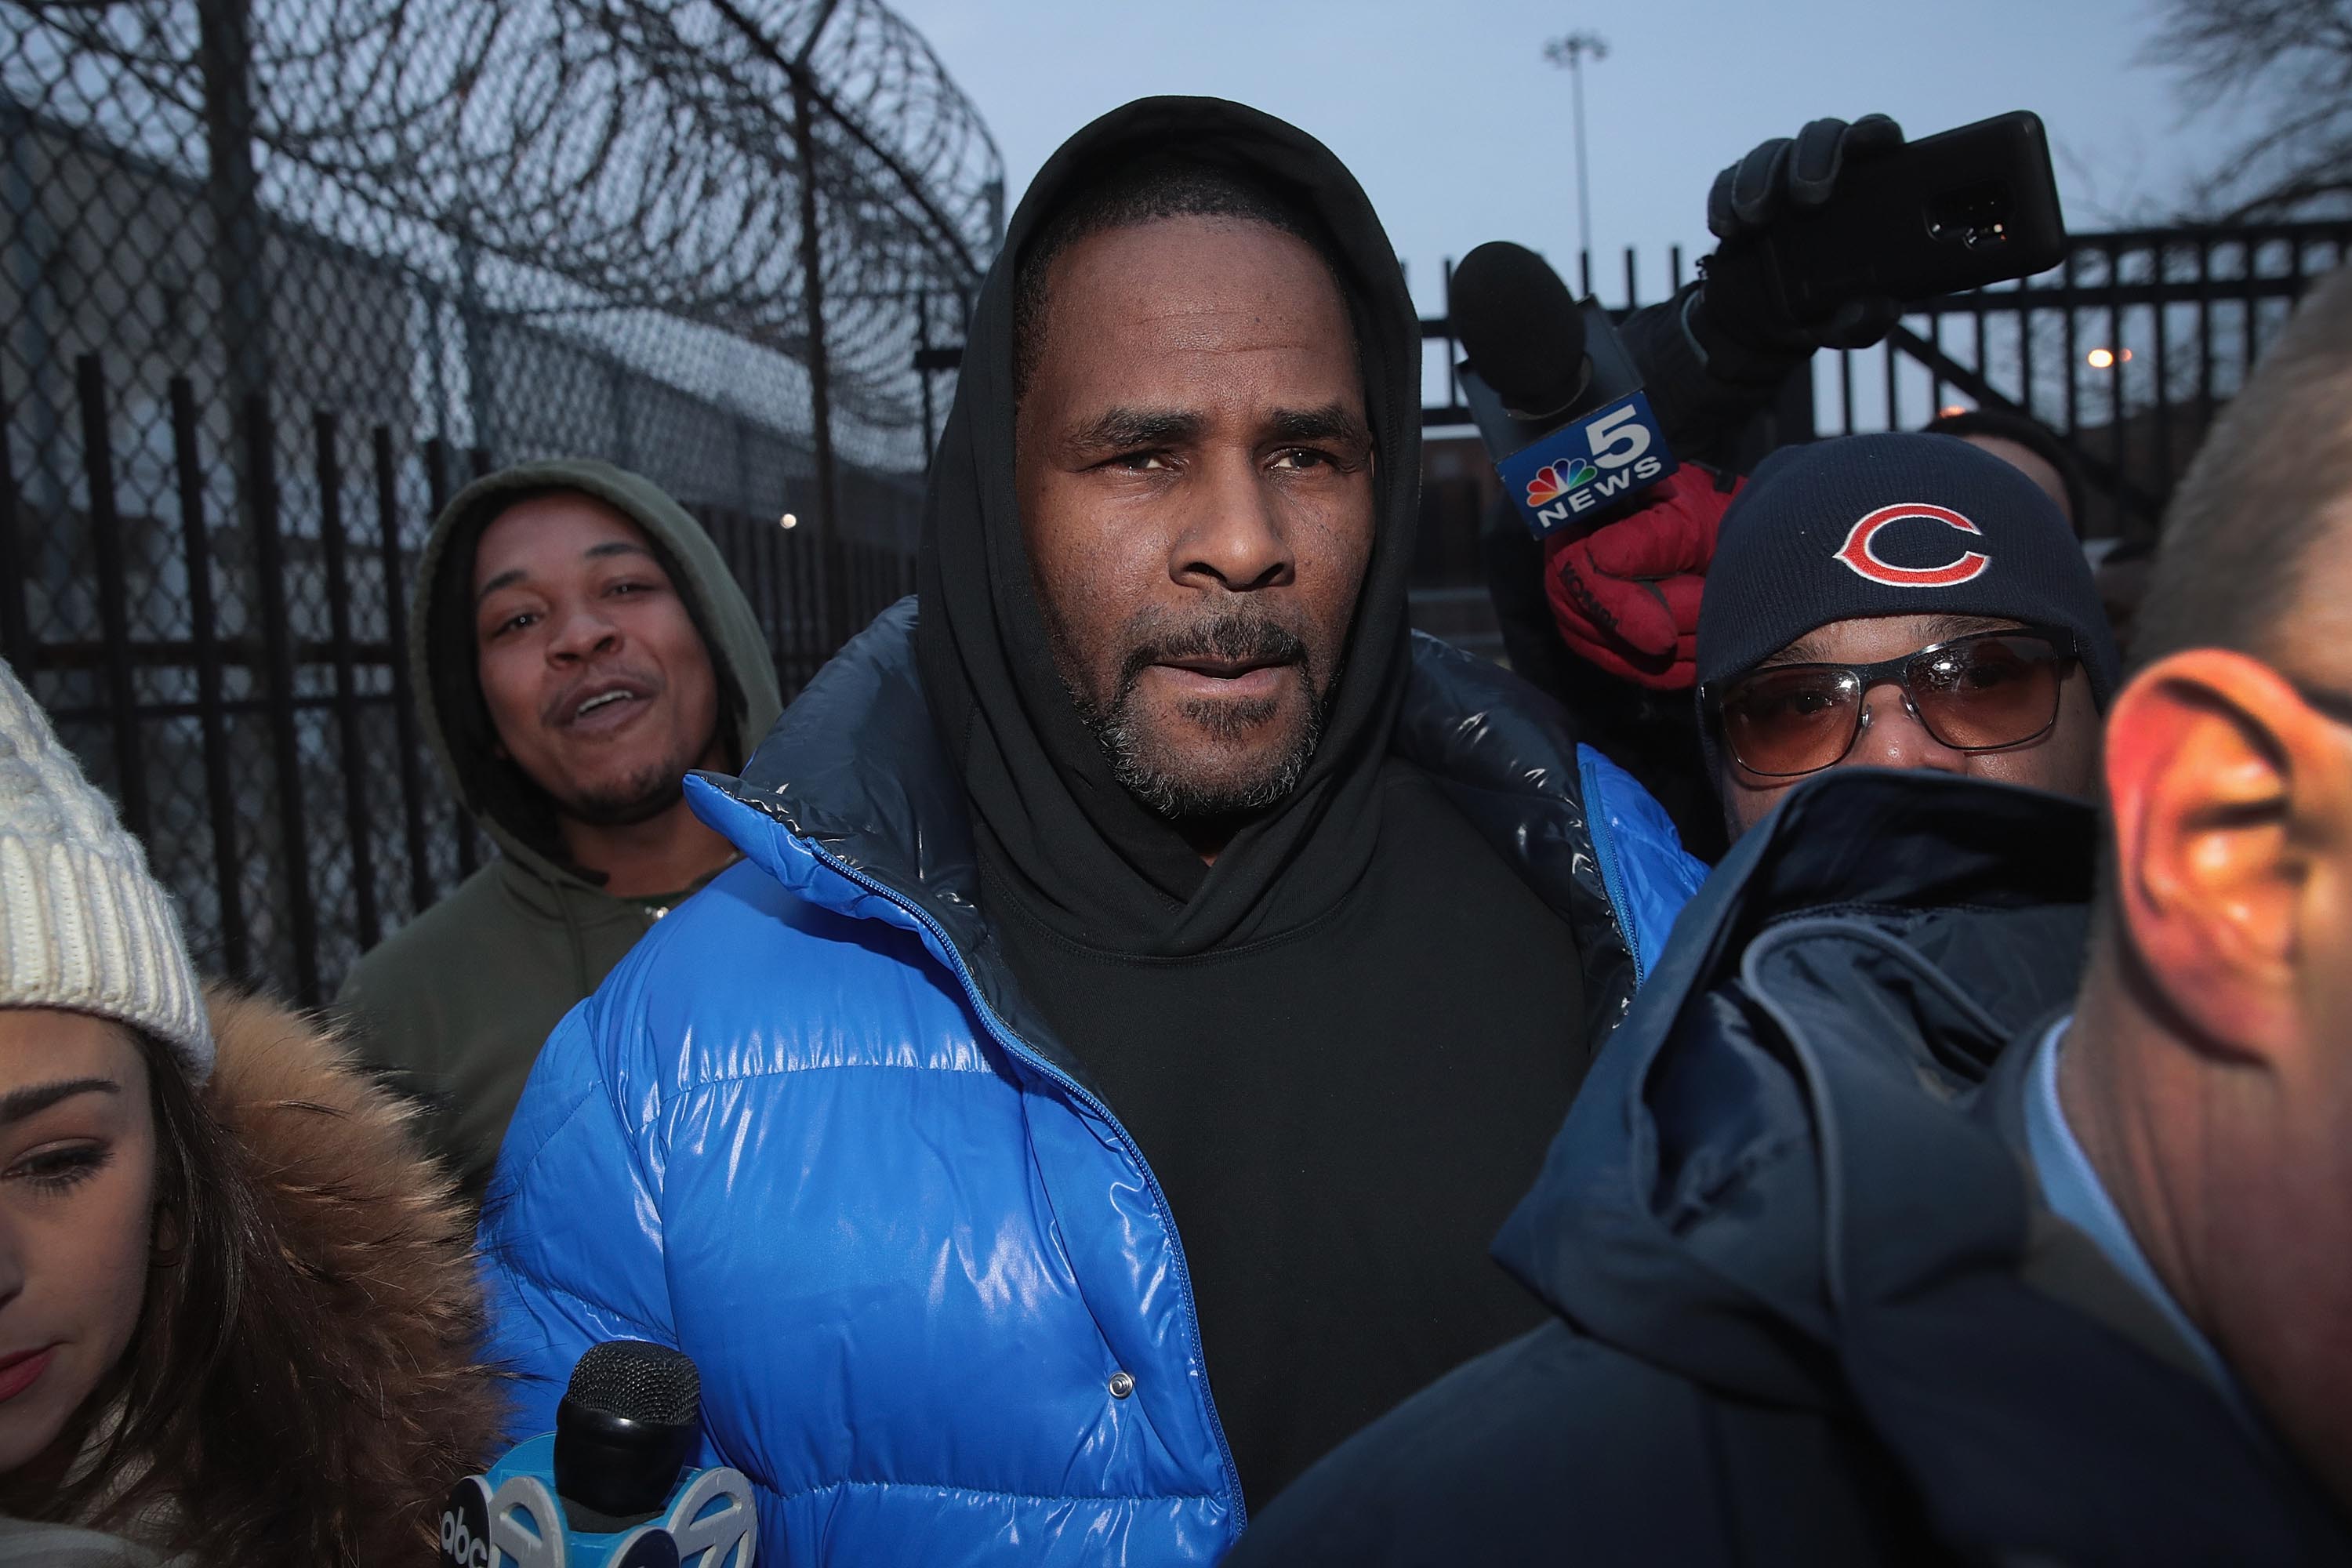 R&B singer R. Kelly leaves the Cook County jail after posting $100 thousand bond on February 25, 2019 in Chicago, Illinois. Kelly was being held after turning himself in to face ten counts of aggravated sexual abuse. (Photo by Scott Olson/Getty Images)